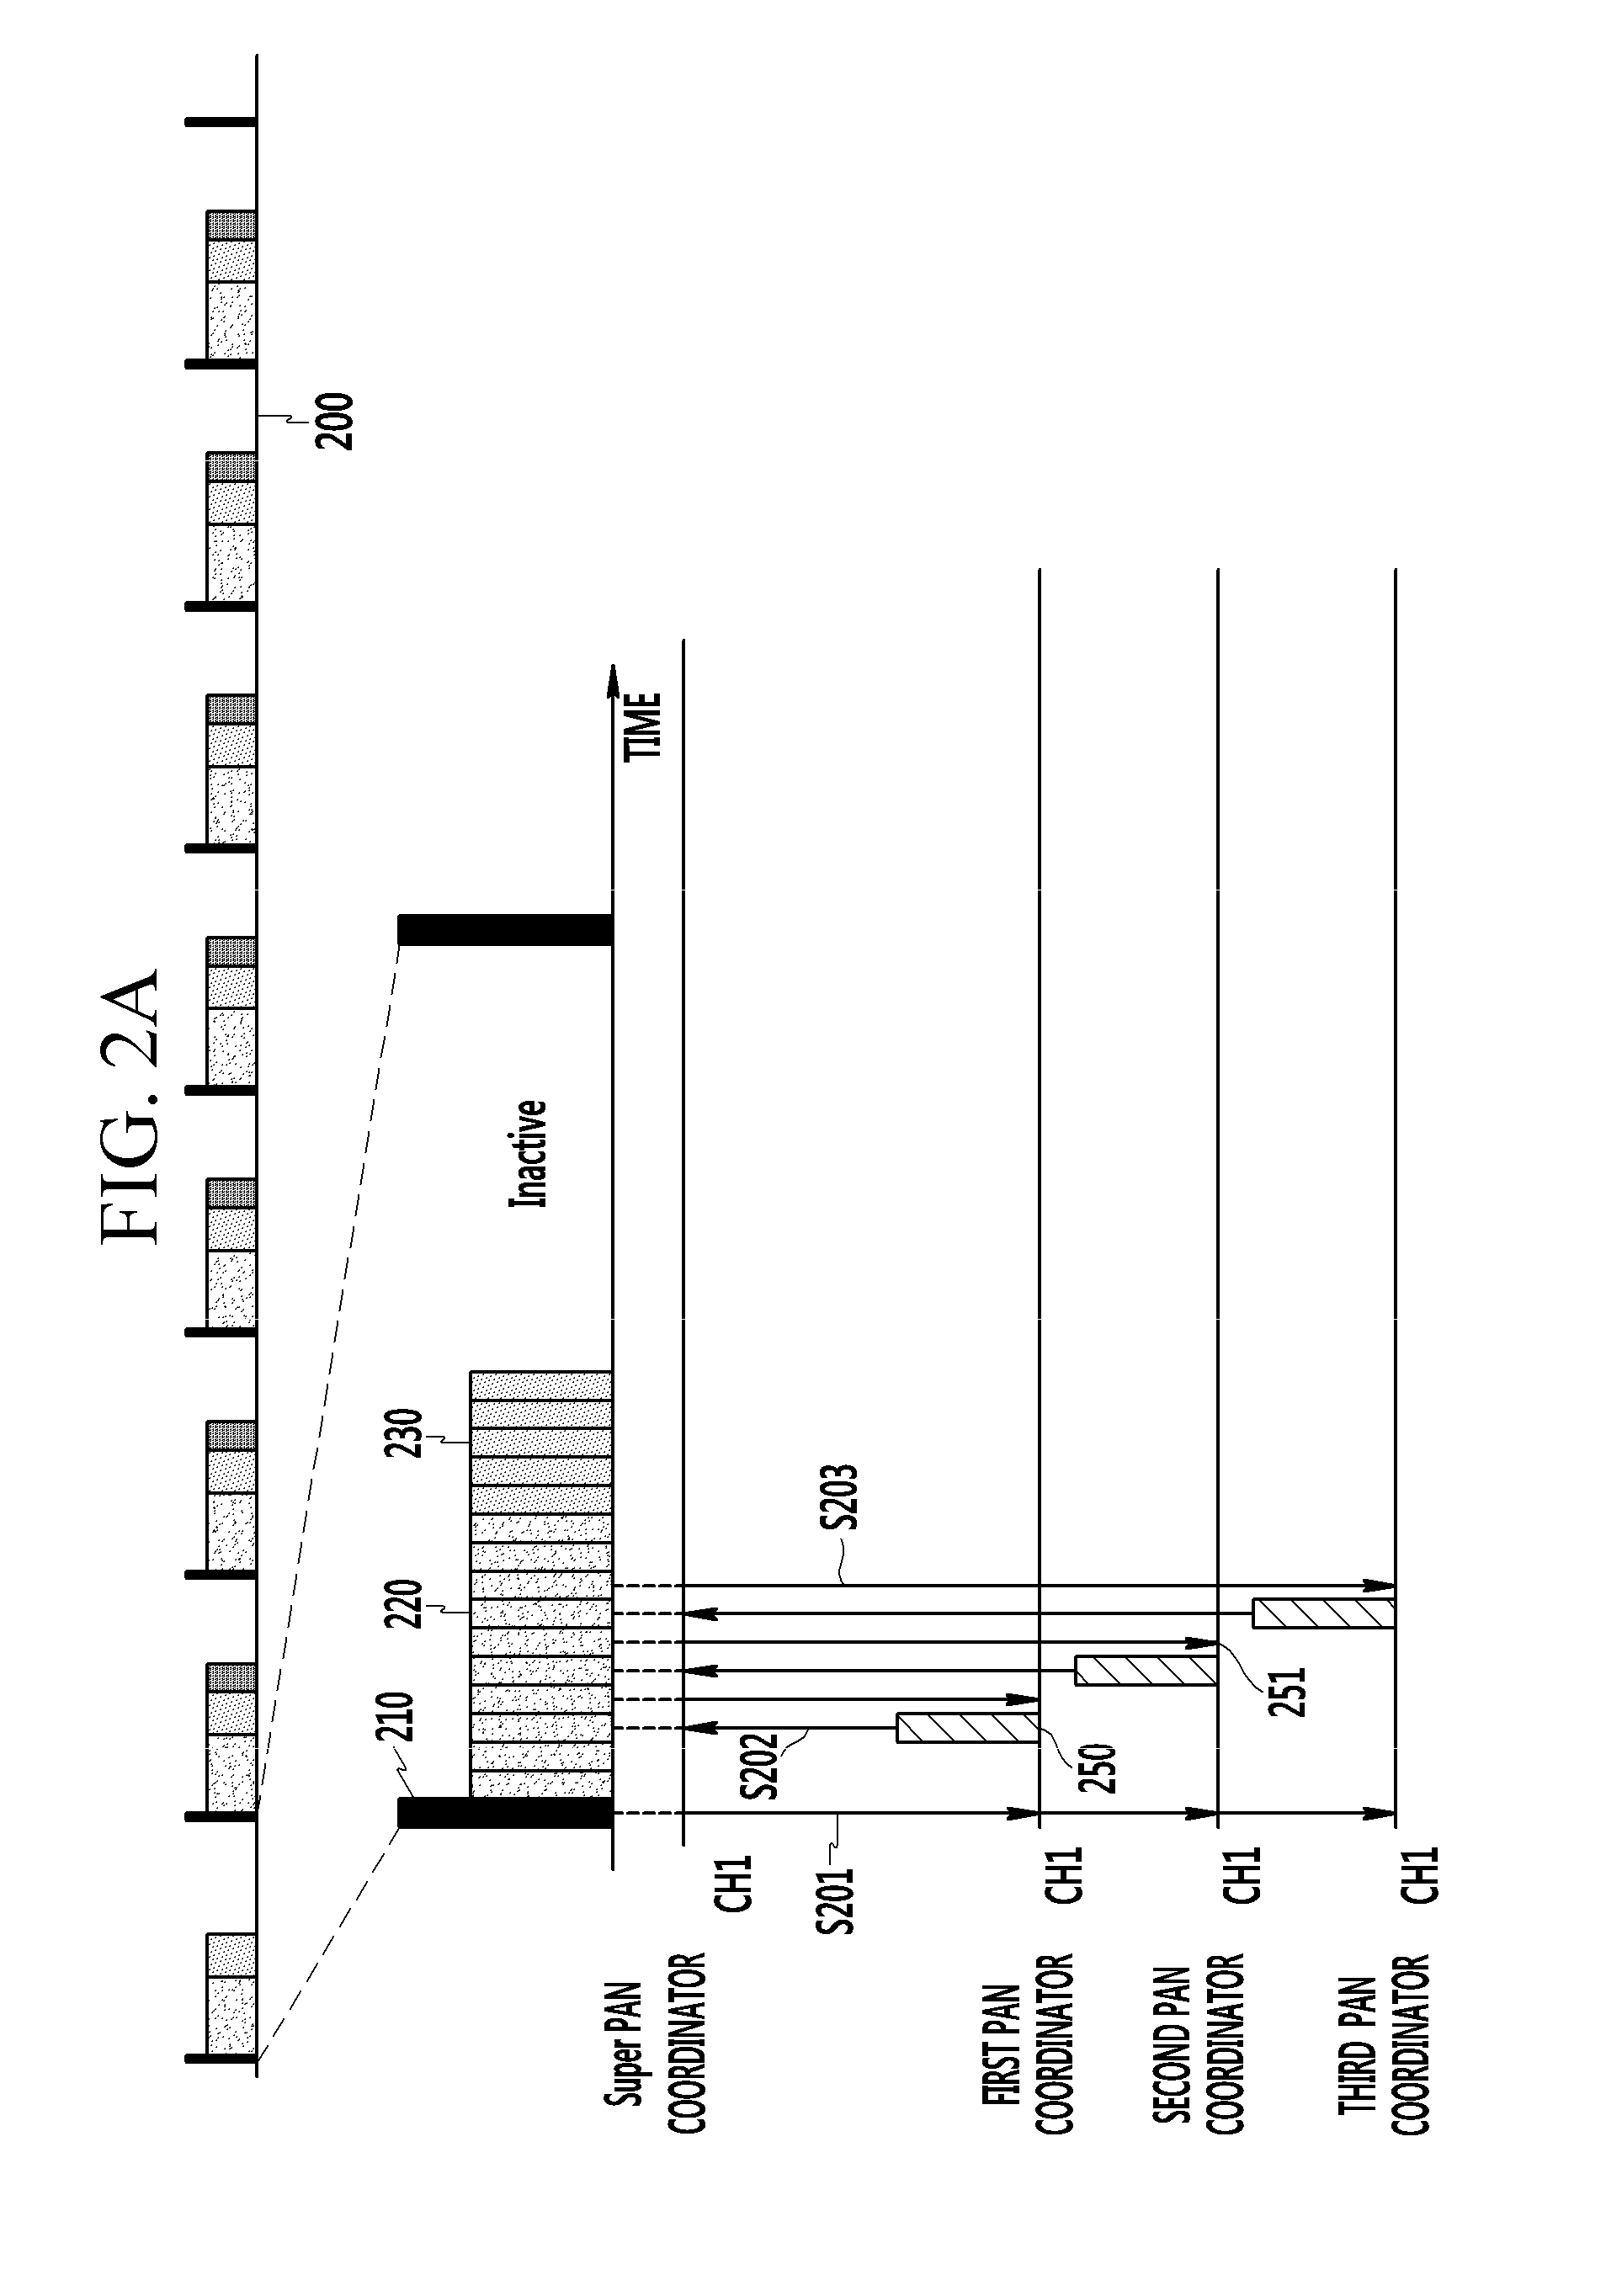 Method of generating networks by utilizing multi-channel